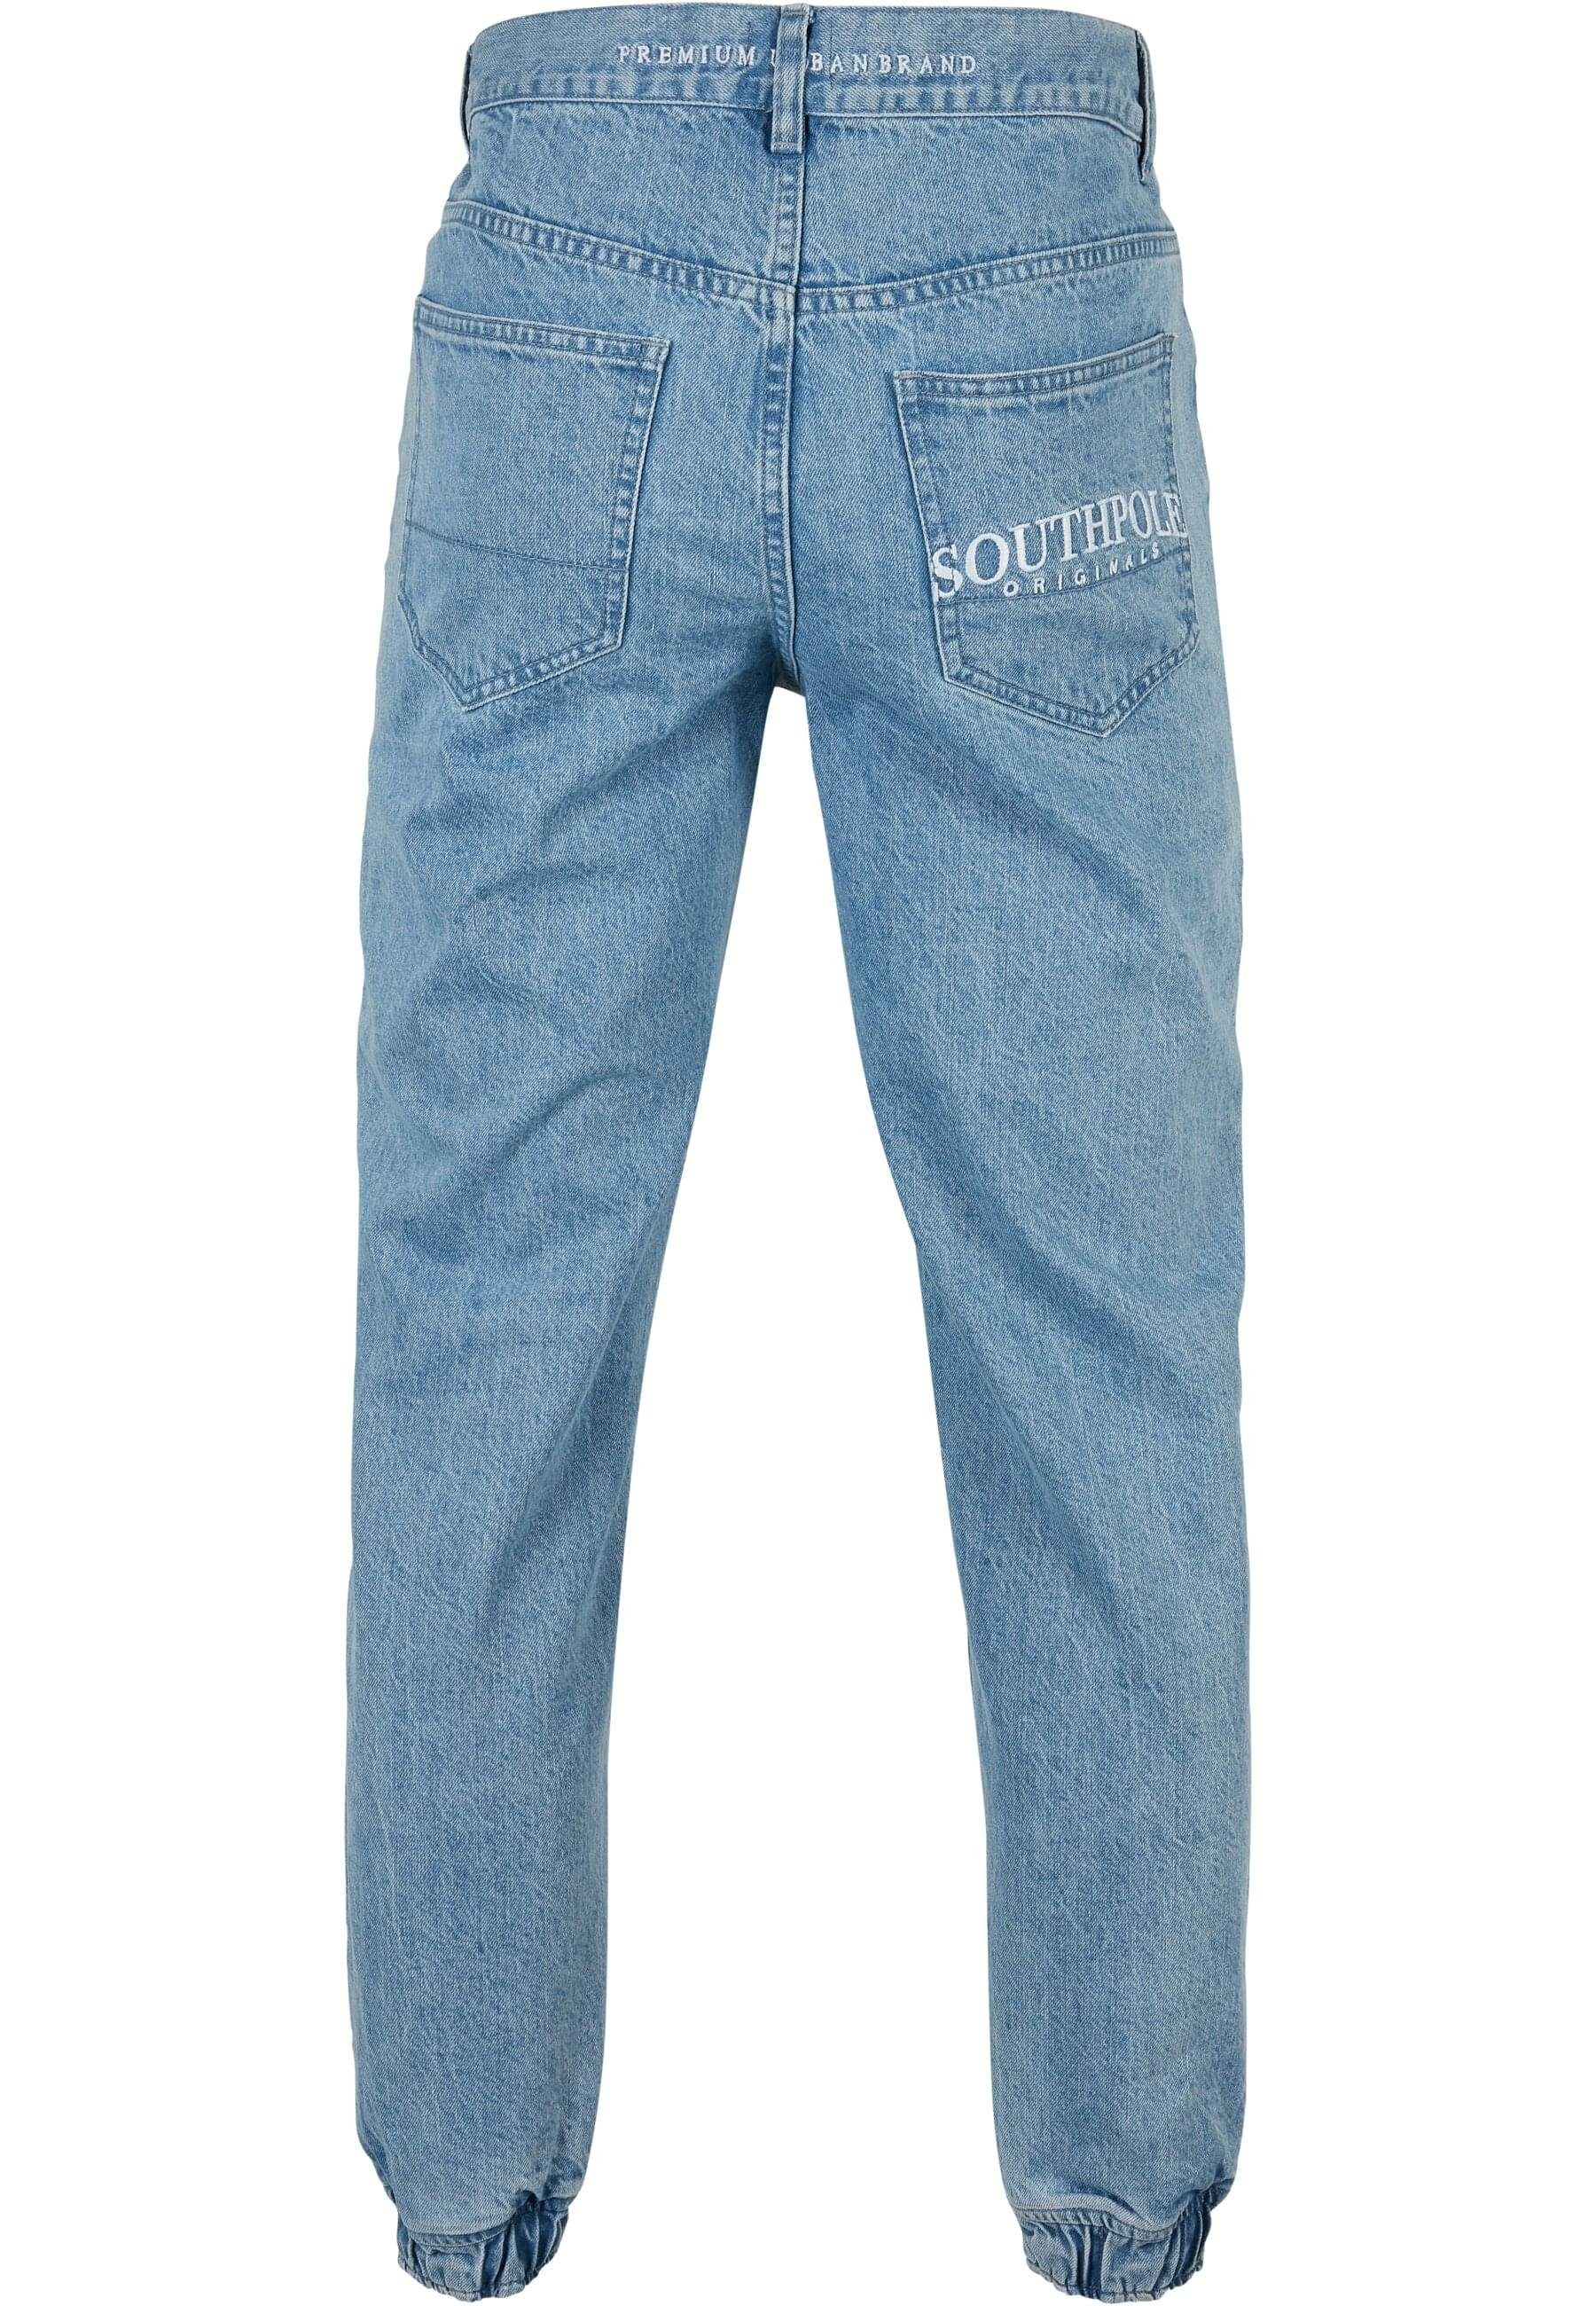 Southpole Herren washed Spray Jeans Logo midblue (1-tlg) Southpole Bequeme Denim